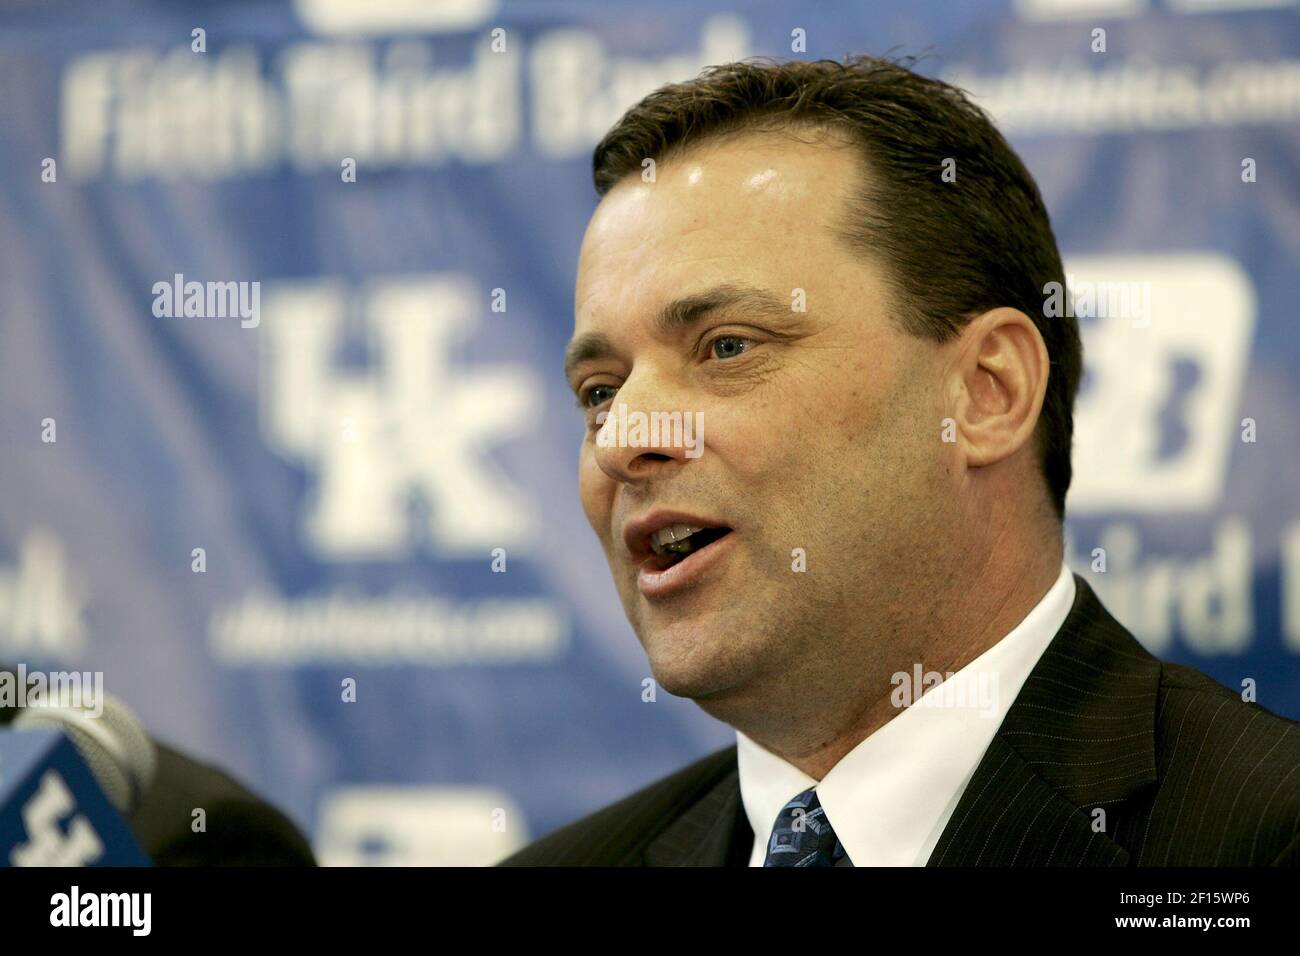 Billy Gillispie, the newly named head coach for the men's basketball team  at the University of Kentucky, meets with the media in Lexington, Kentucky,  on Friday, April 6, 2007. (Photo by Charles